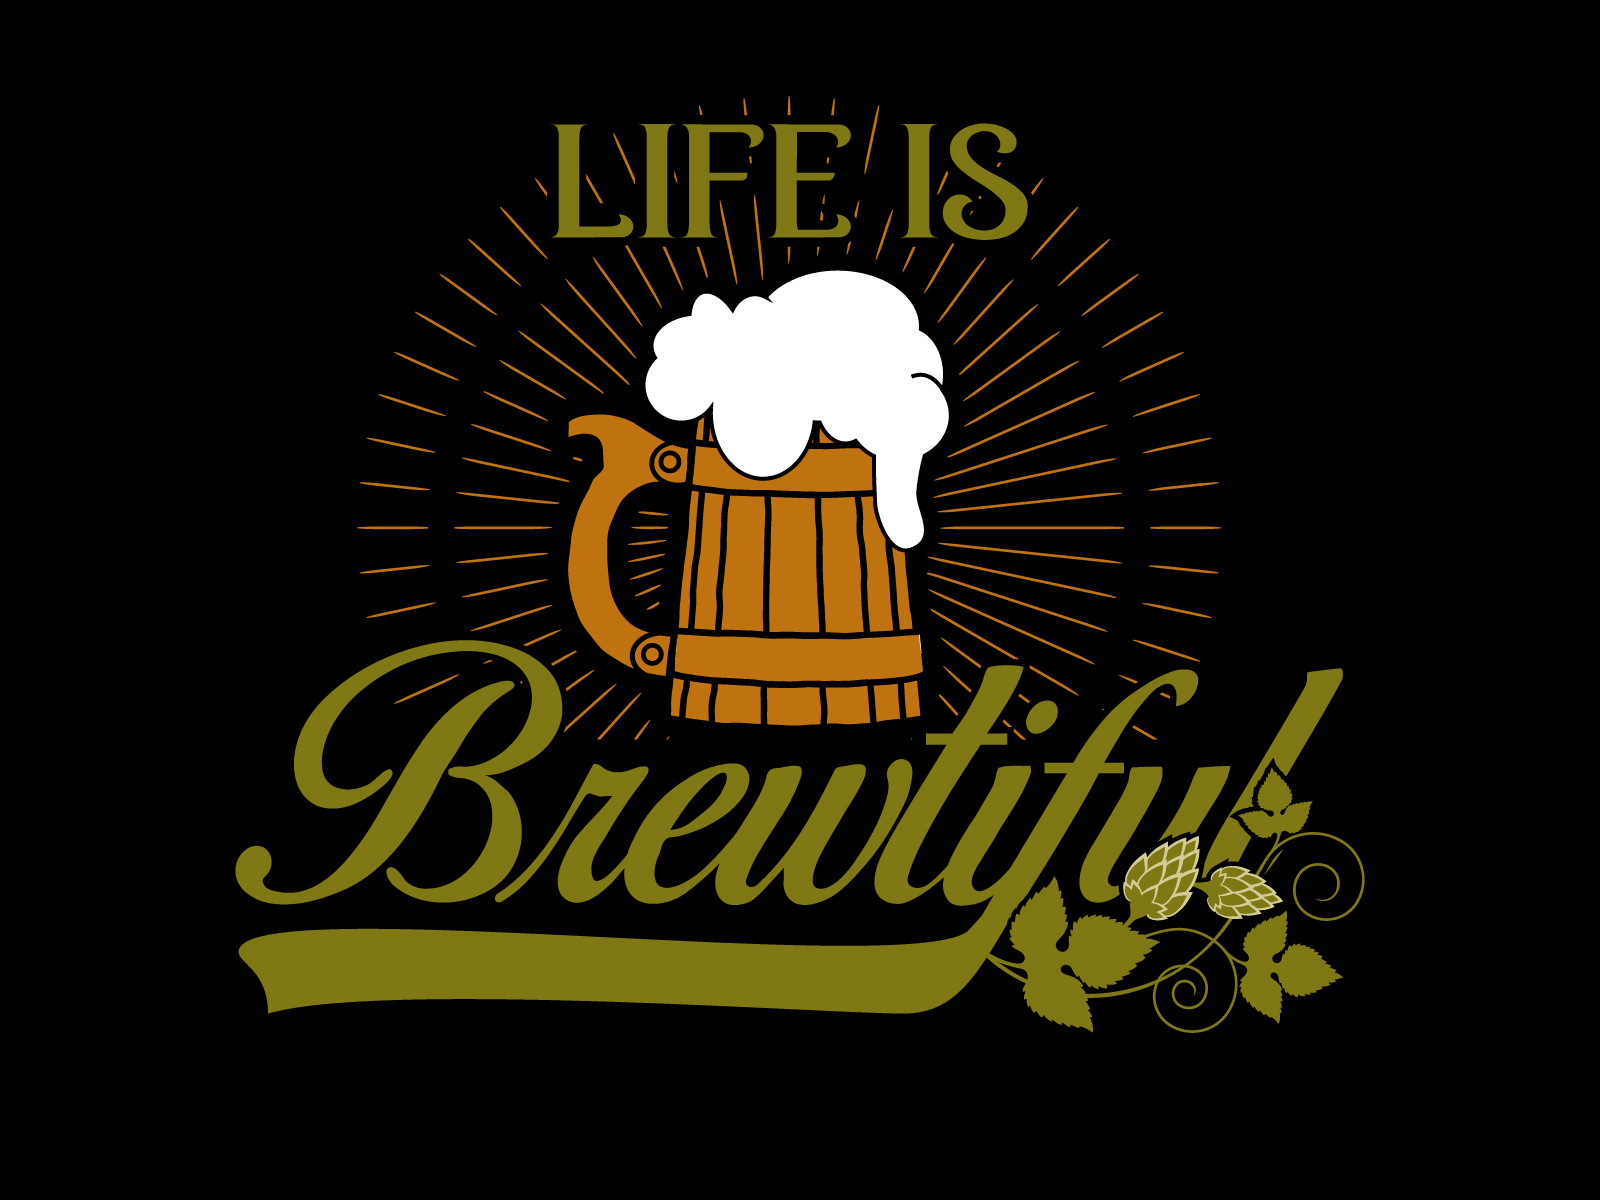 Life is Brewtifull Craft Beer Design by Gonzalo on Dribbble